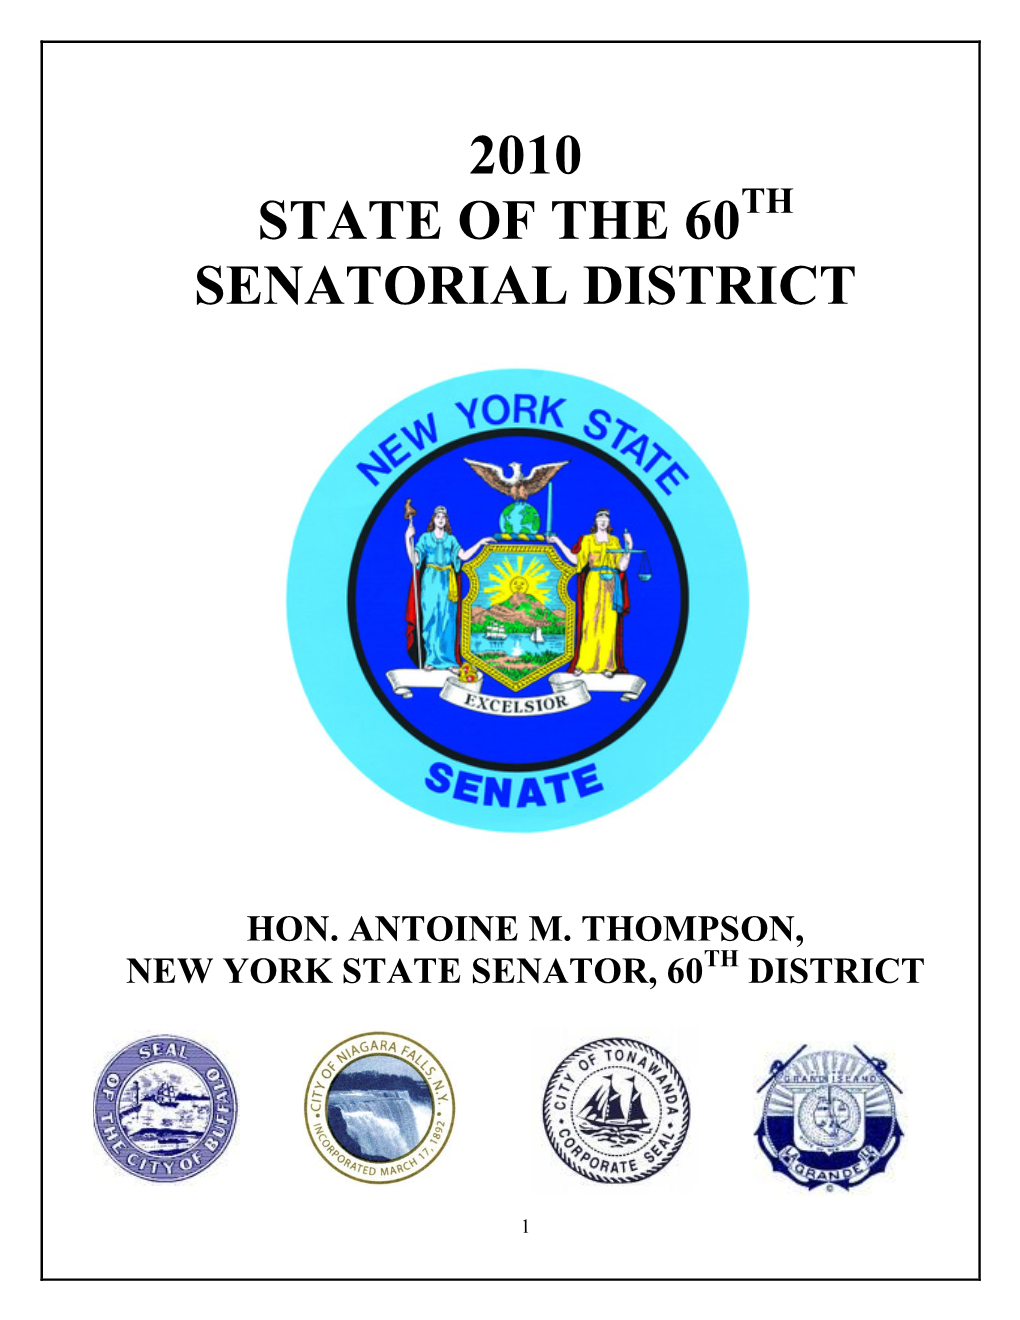 2010 State of the 60 Senatorial District